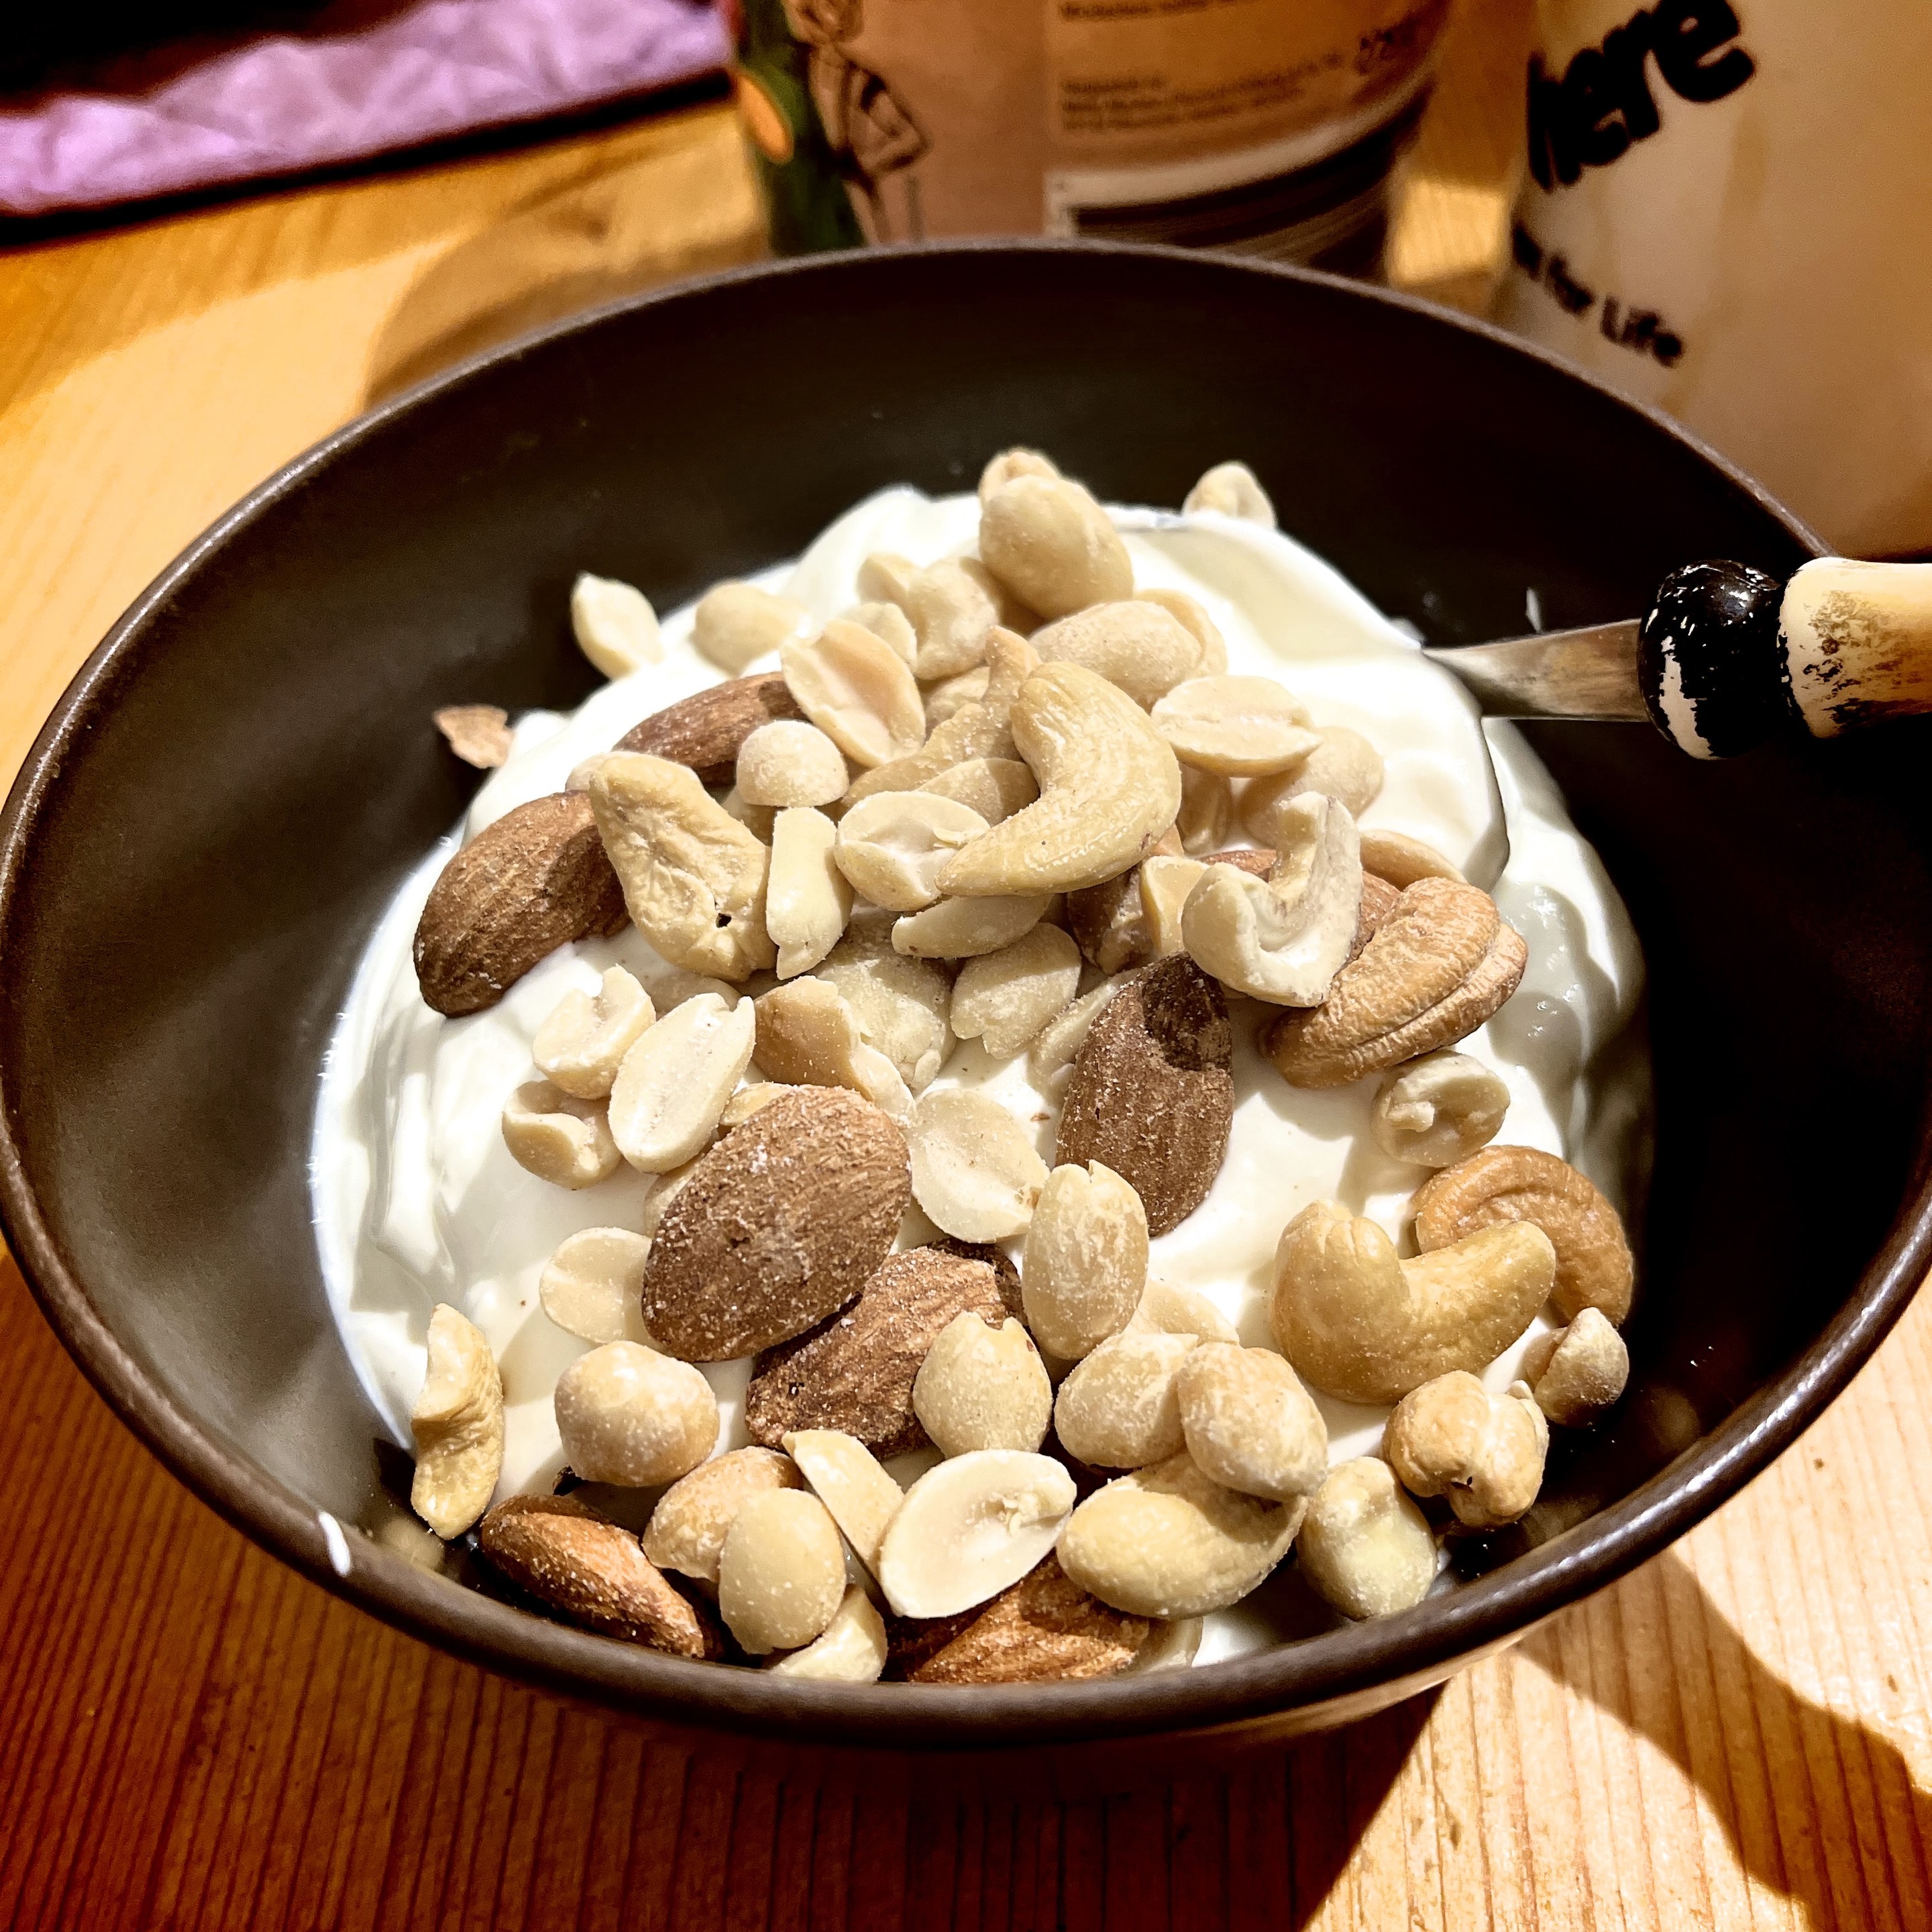 A bowl of yogurt with mixed nuts and a spoon on a wooden table.